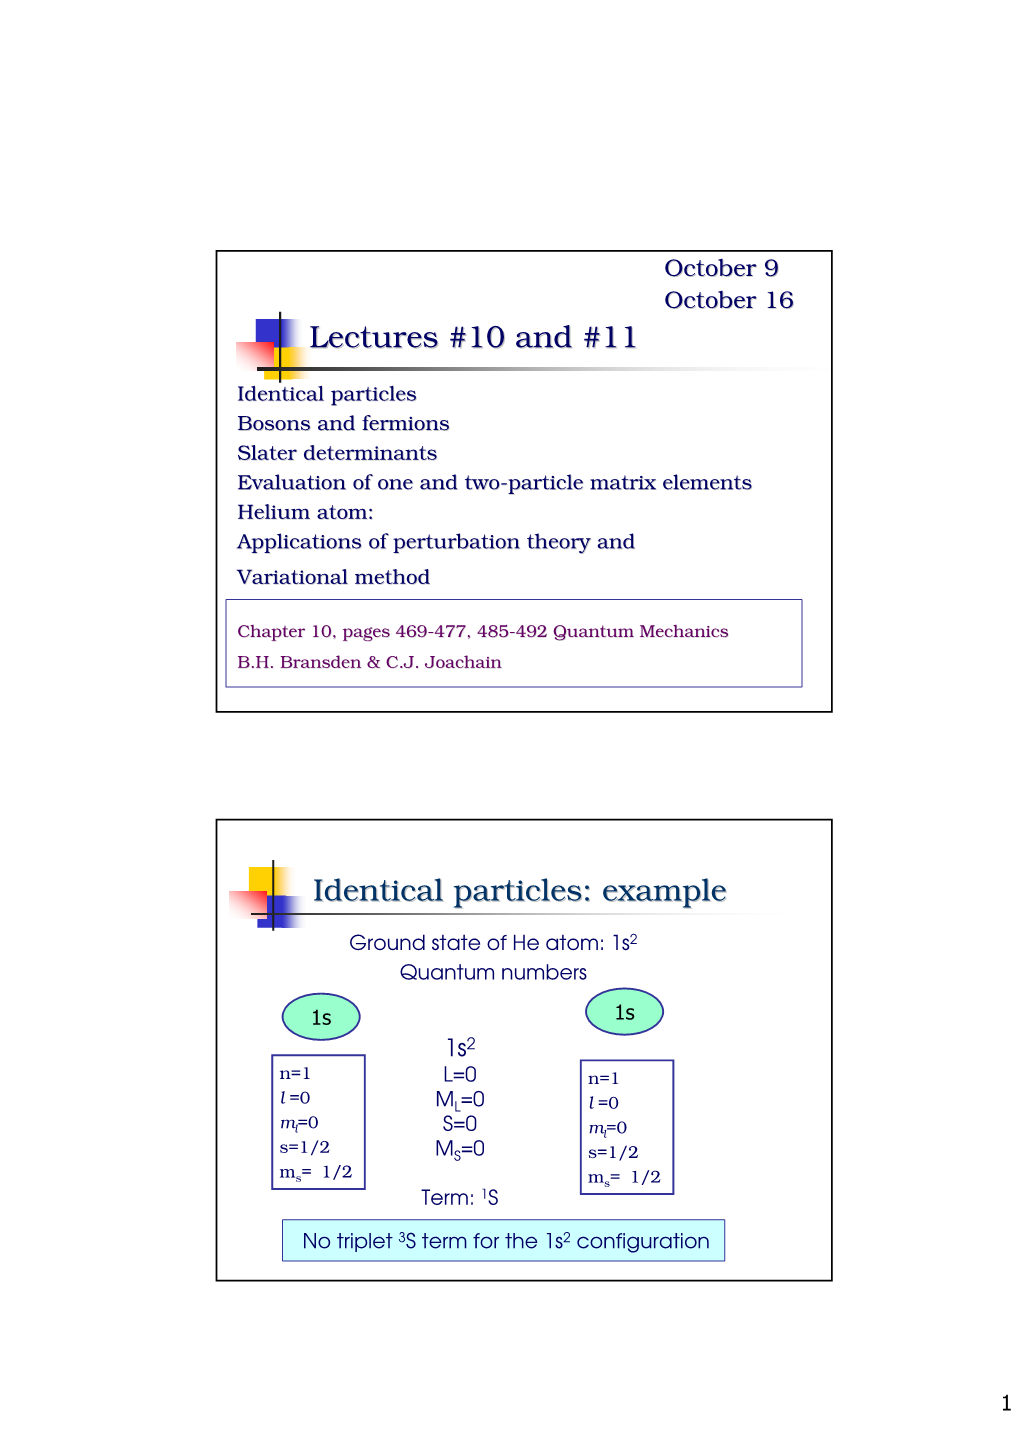 Lectures #10 and #11 Identical Particles: Example